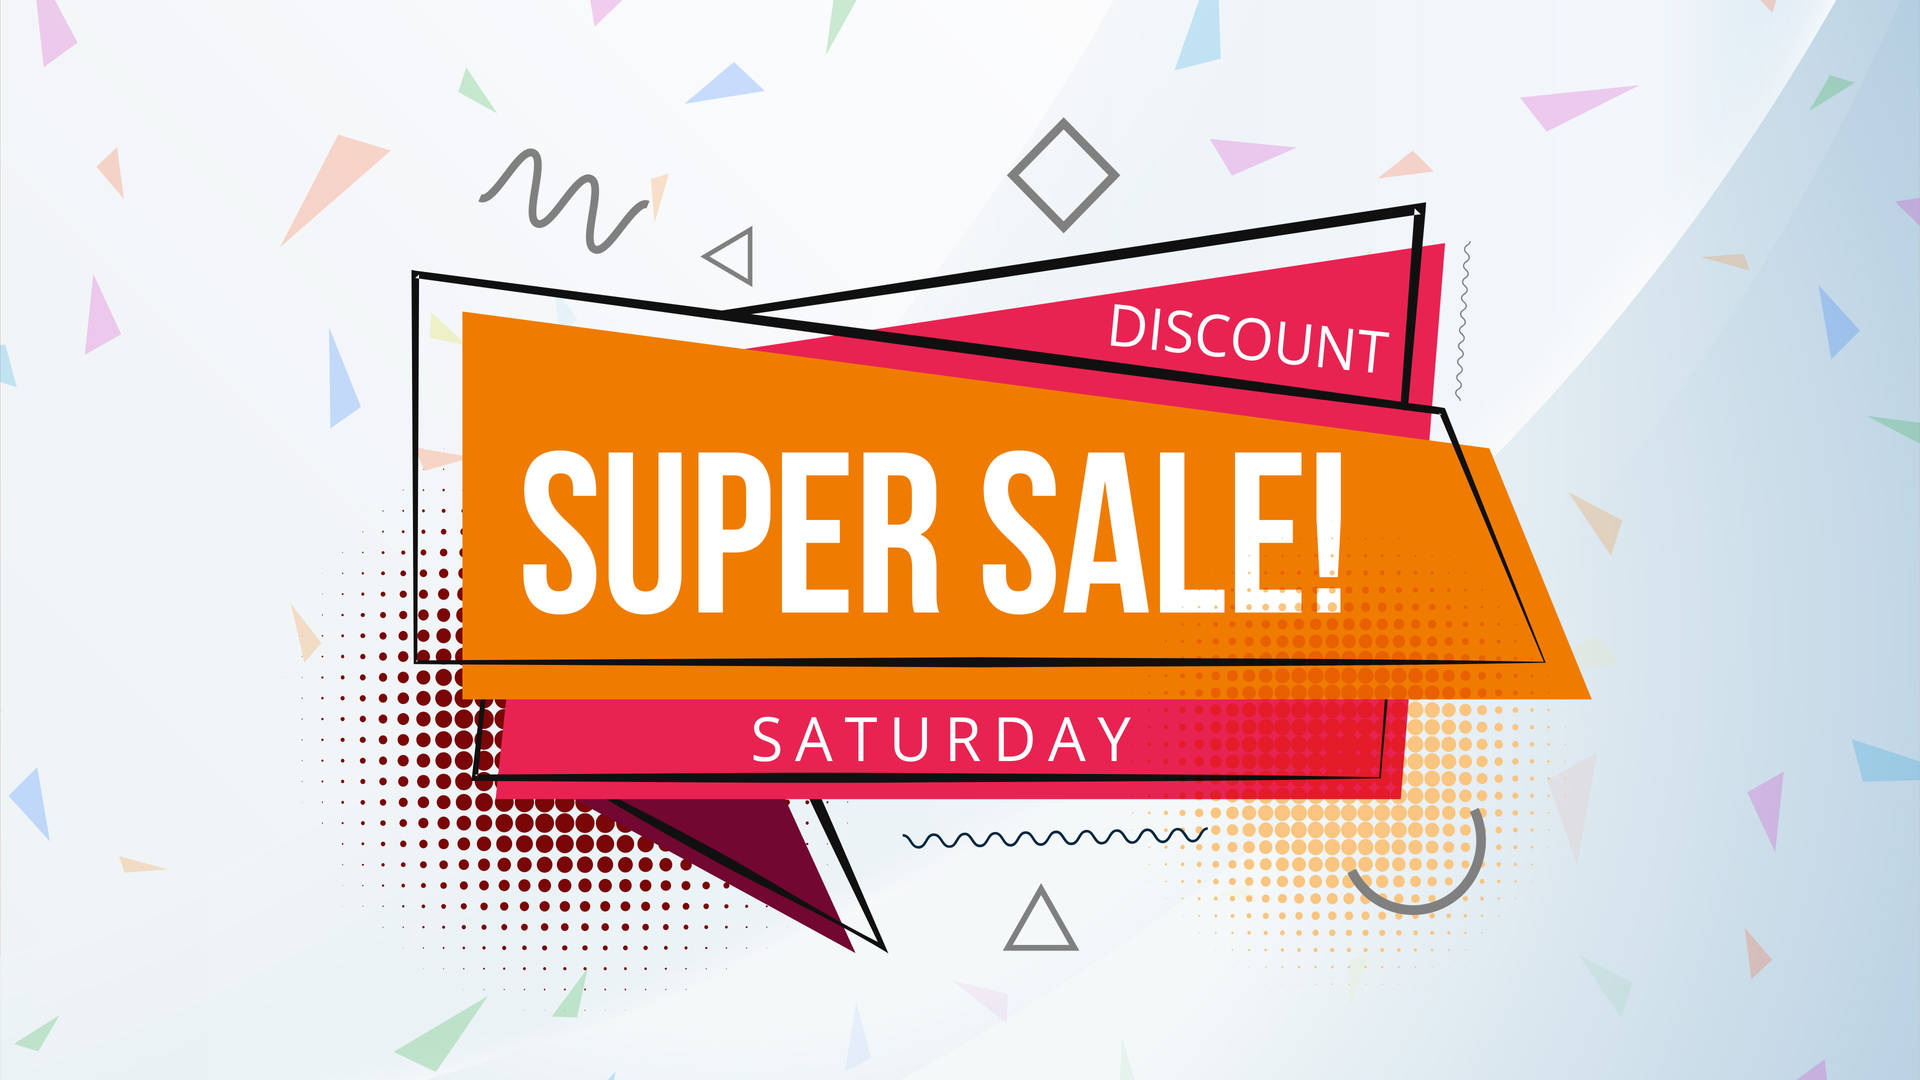 Super Saturday Sales Fever On Festive Items Background